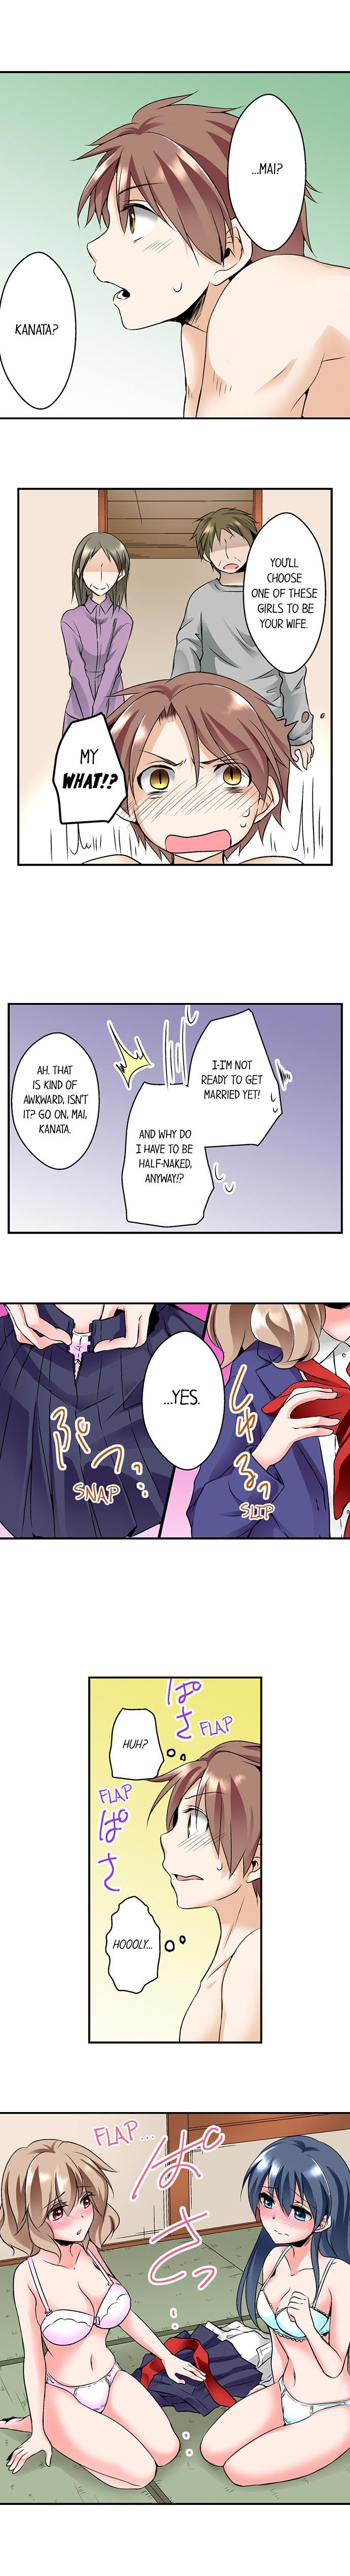 Asia Naked Matchmaking with My Childhood Friends Ch.12/? Students - Page 7